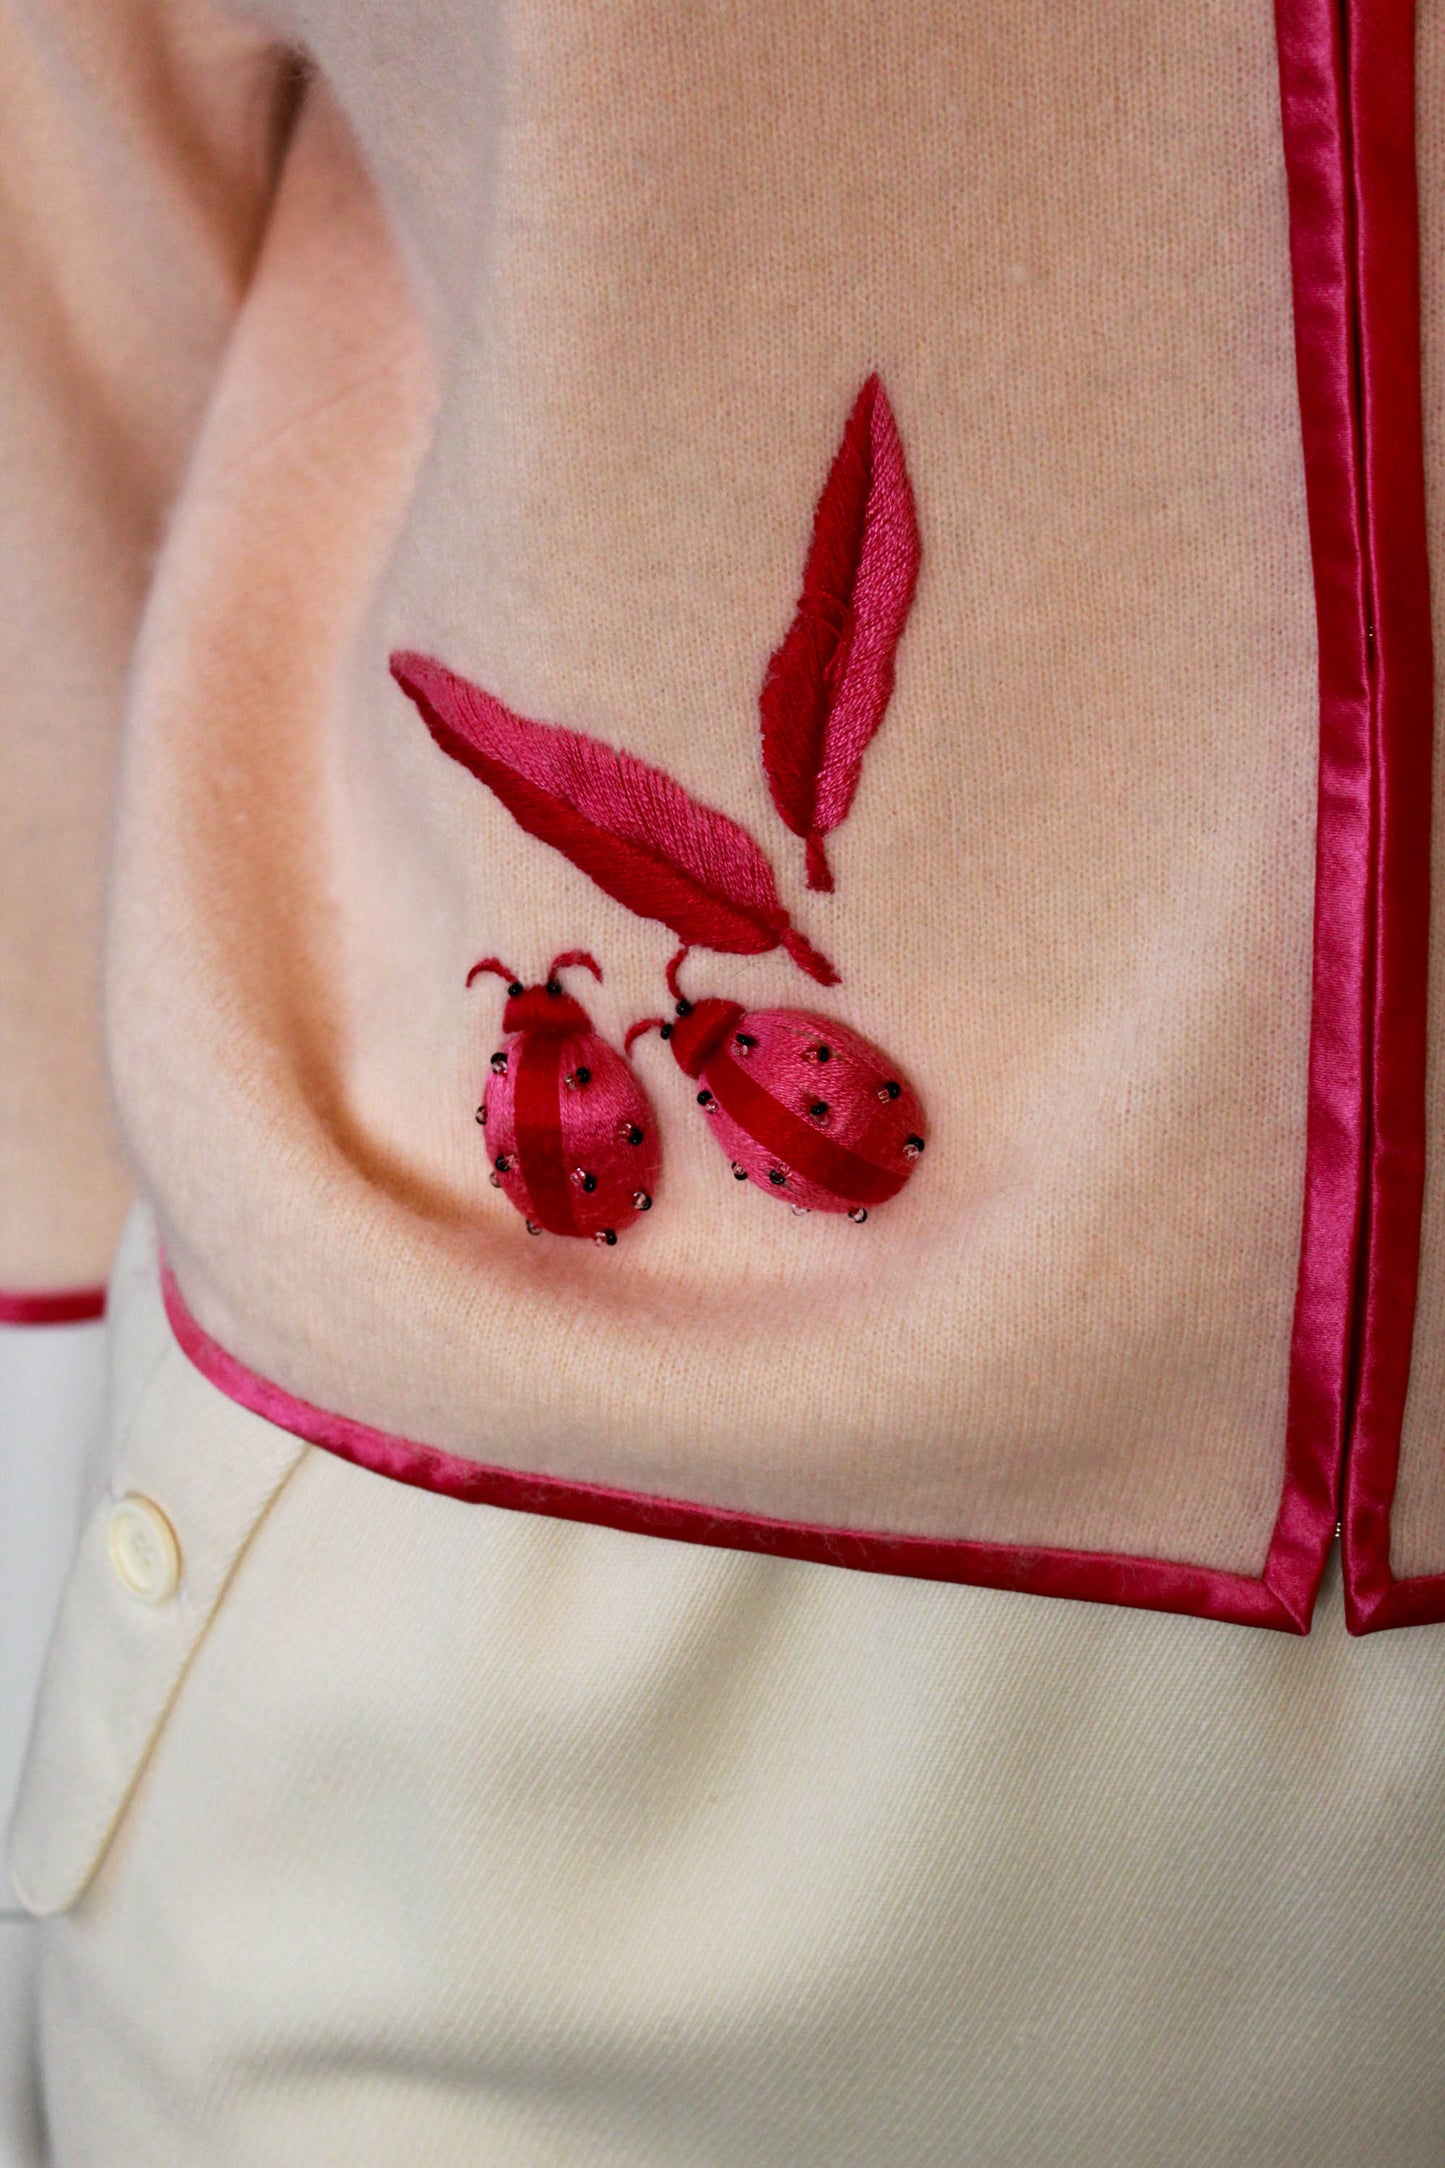 1950s lanvin cashmere pale peach pink cardigan with hot pink embroidered ladybugs and leaves, novelty vintage appliqued cardigan